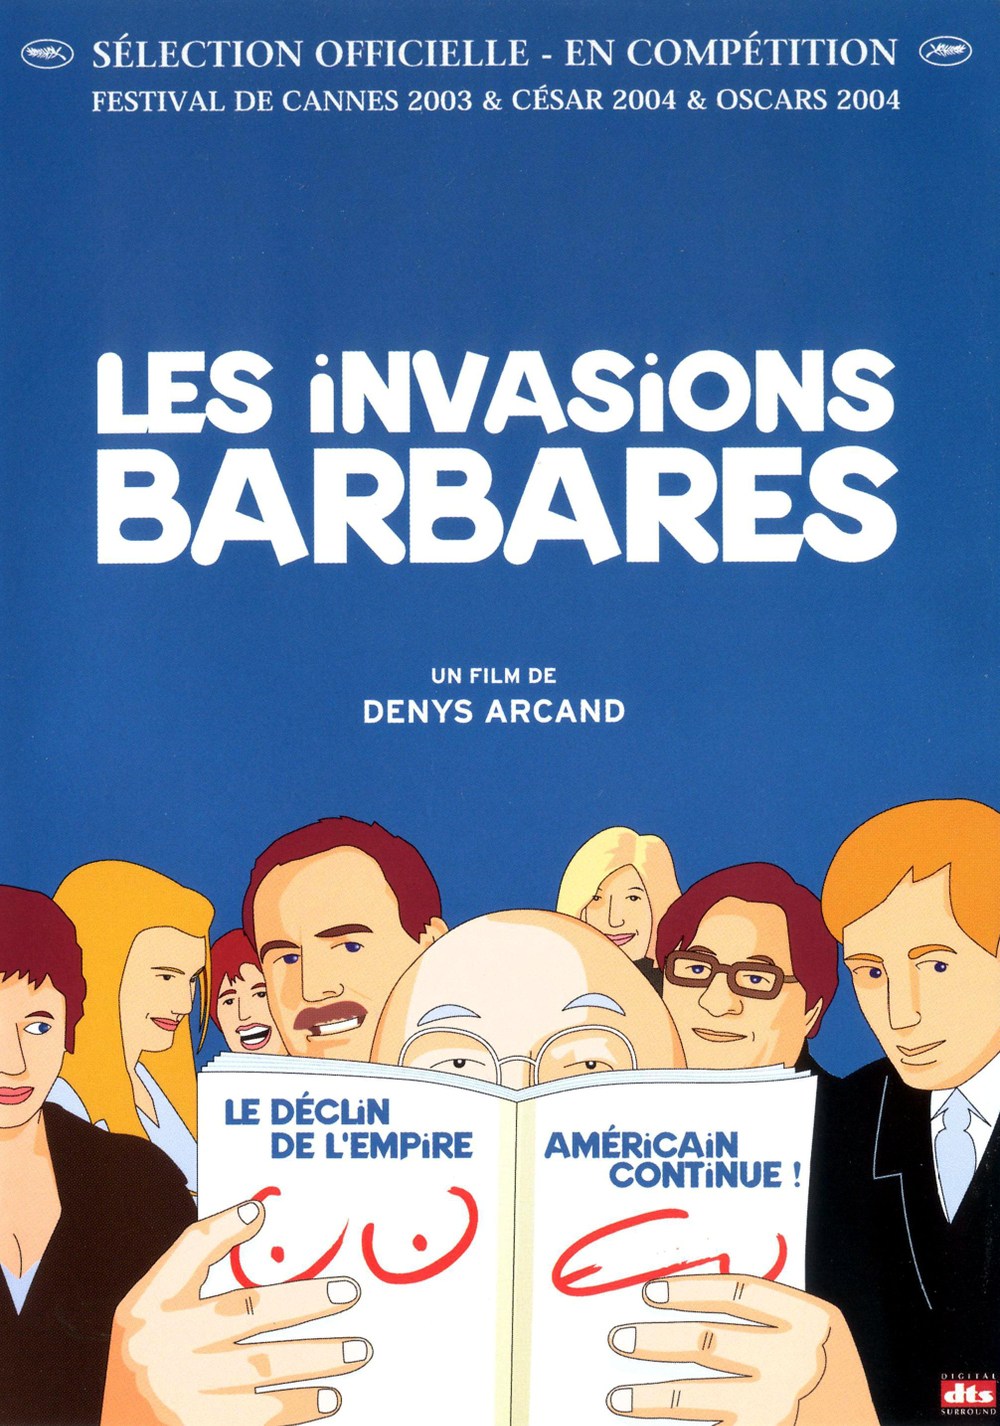 BLOG Les Invasions Barbares (Denys Arcand, 2003) can (3A)